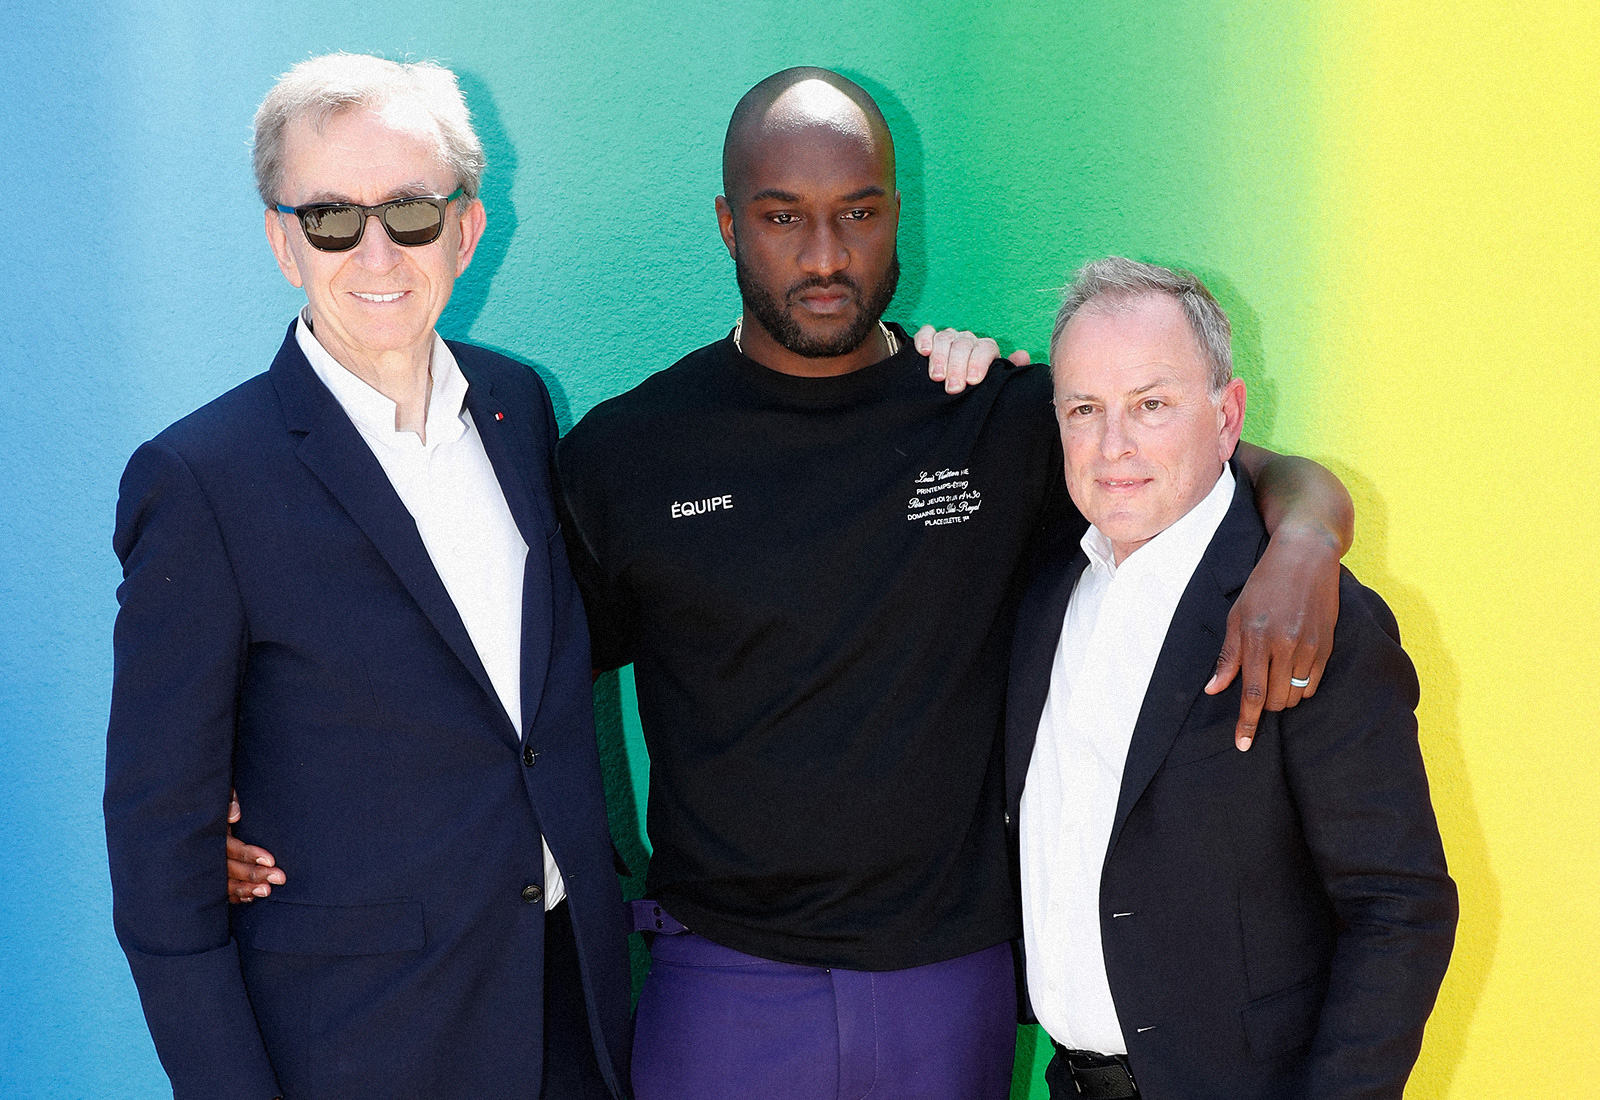 virgil abloh, Bernard Arnault and Michael Burke posing together with colorful background lvmh off-white